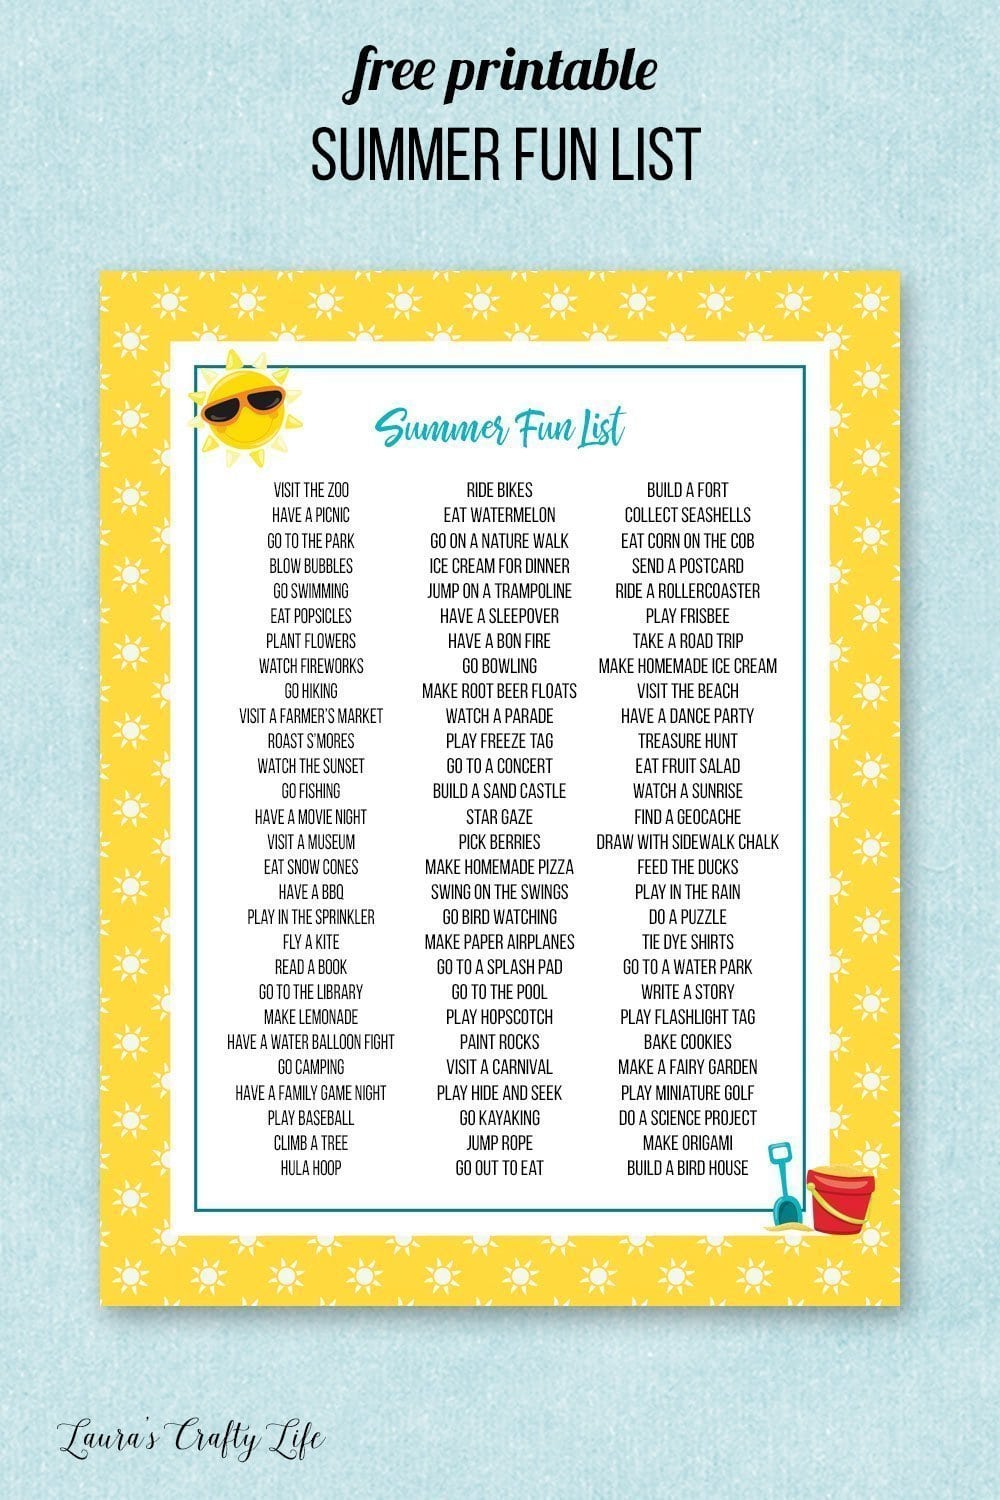 Free printable summer fun list - tons of ideas for what to do with your family and the kids for summer